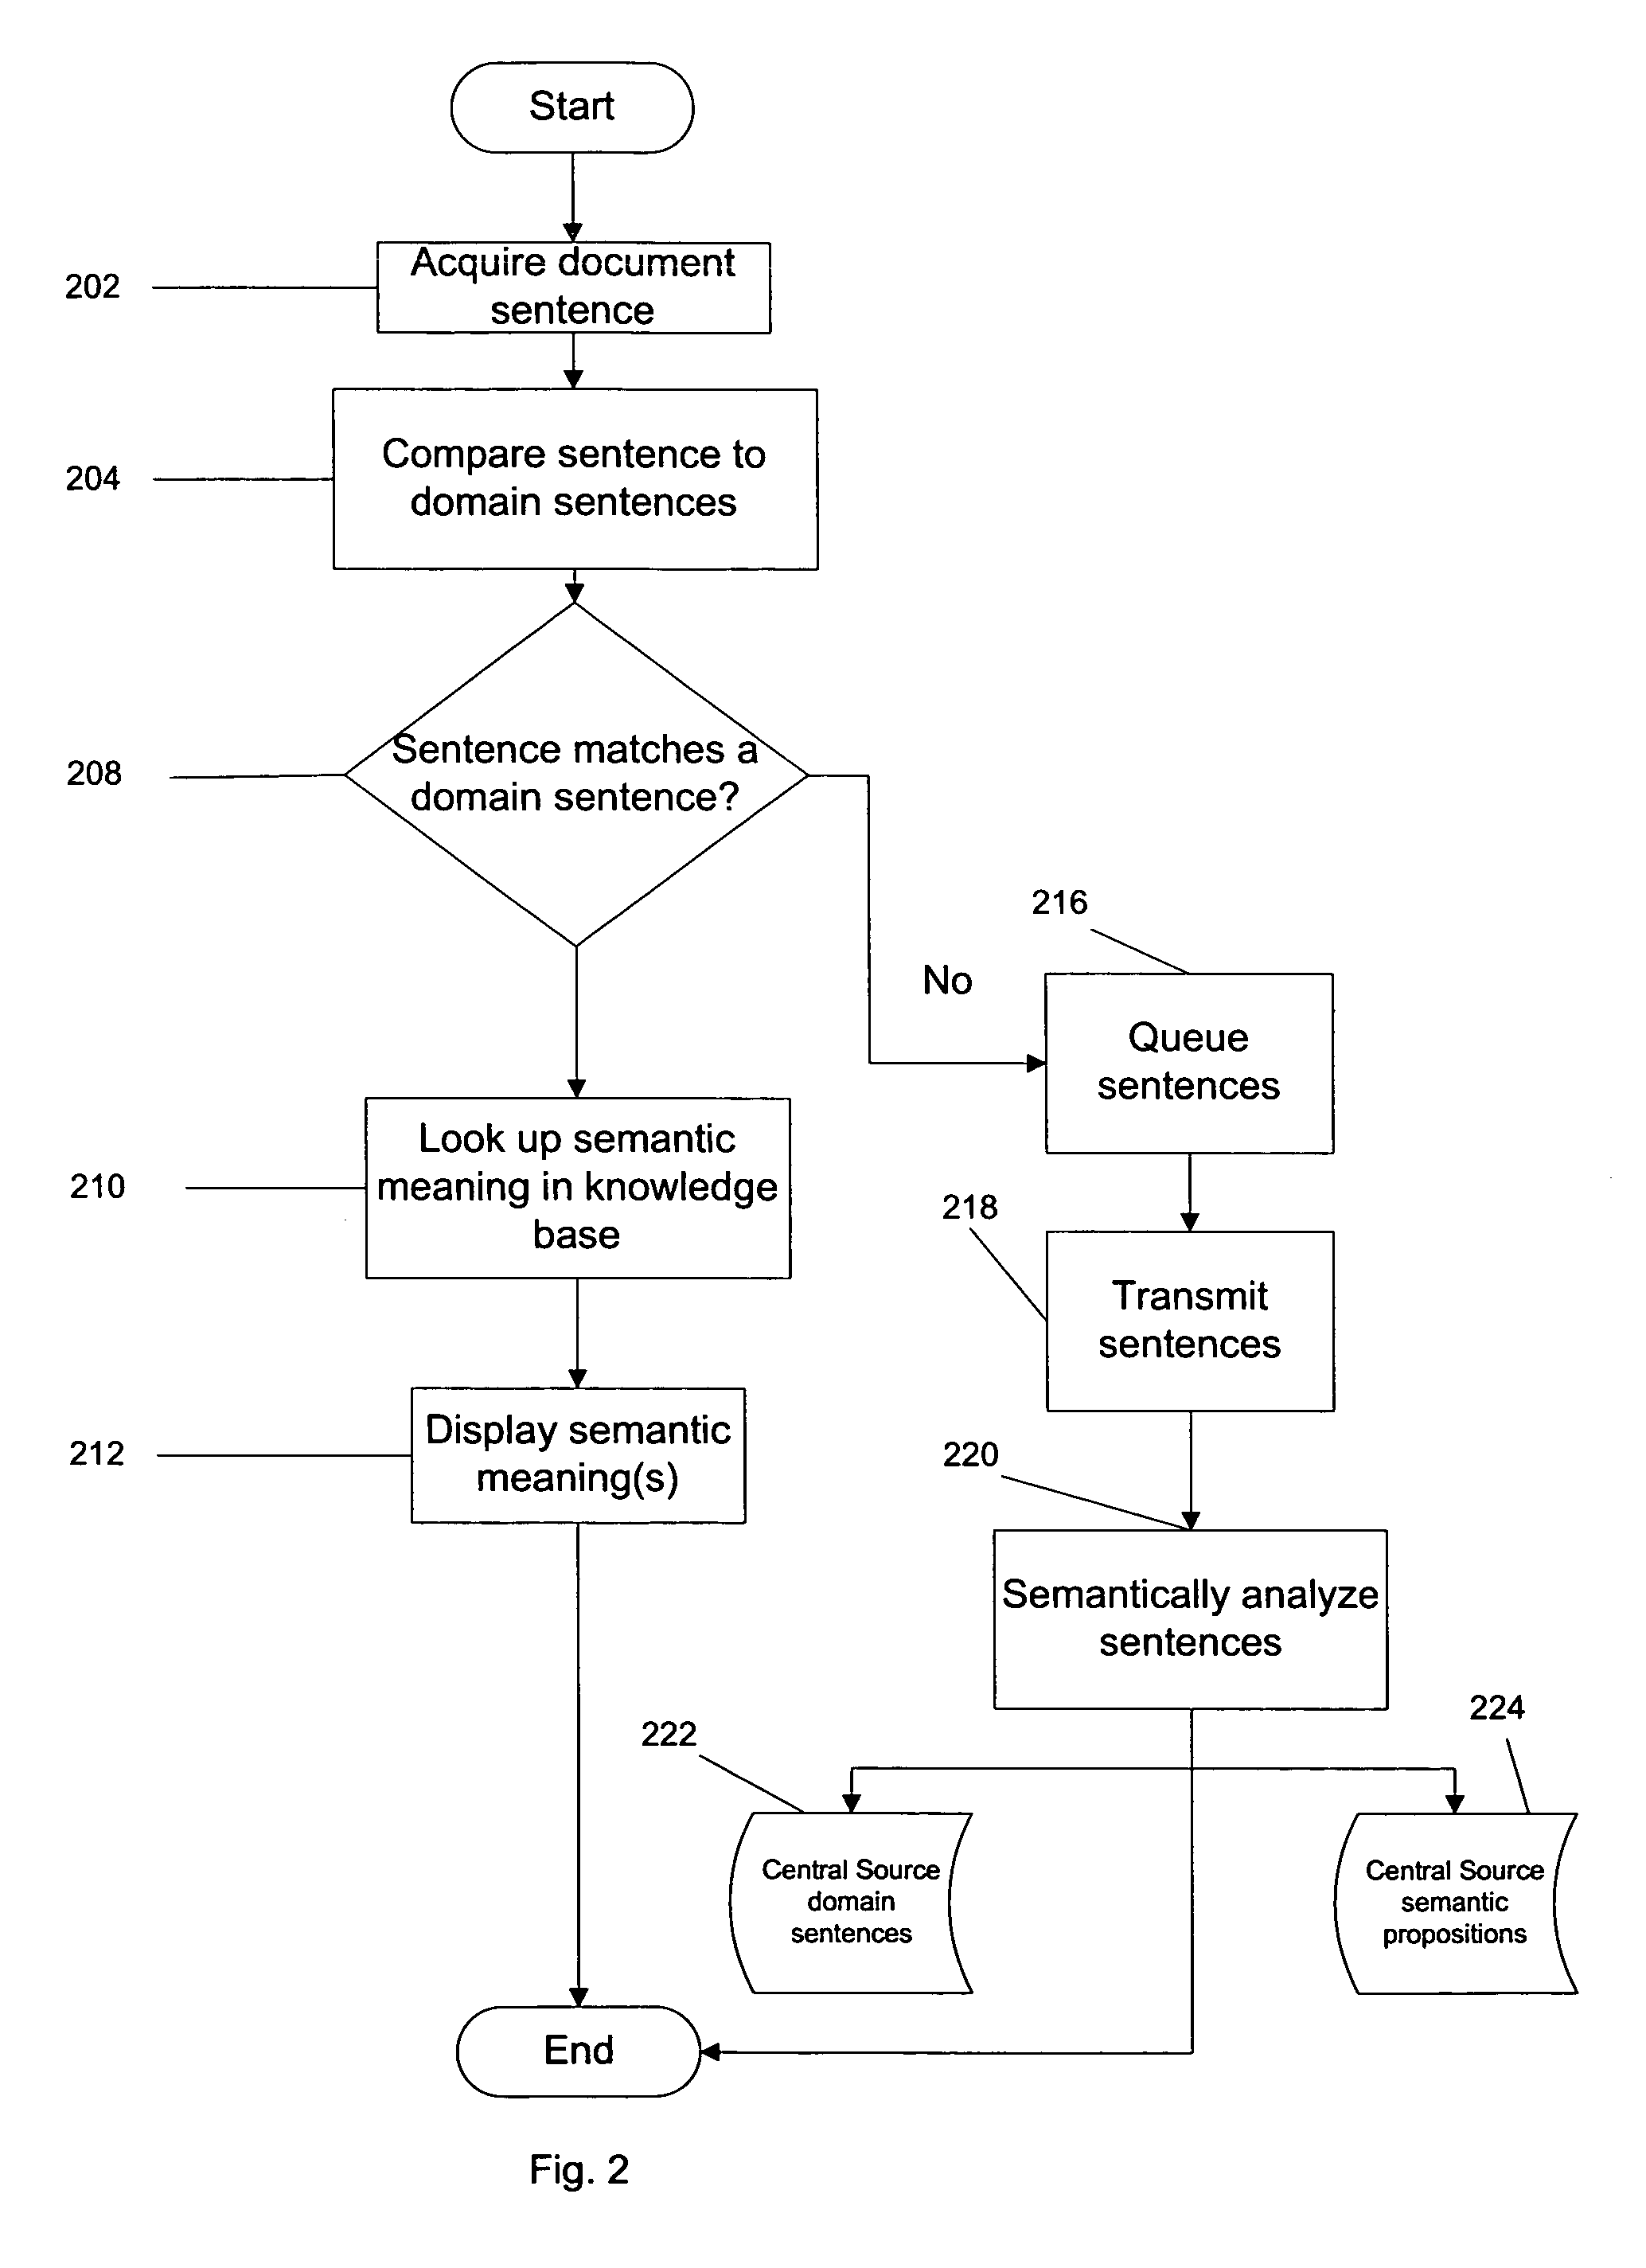 Process and system for updating semantic knowledge over a computer network